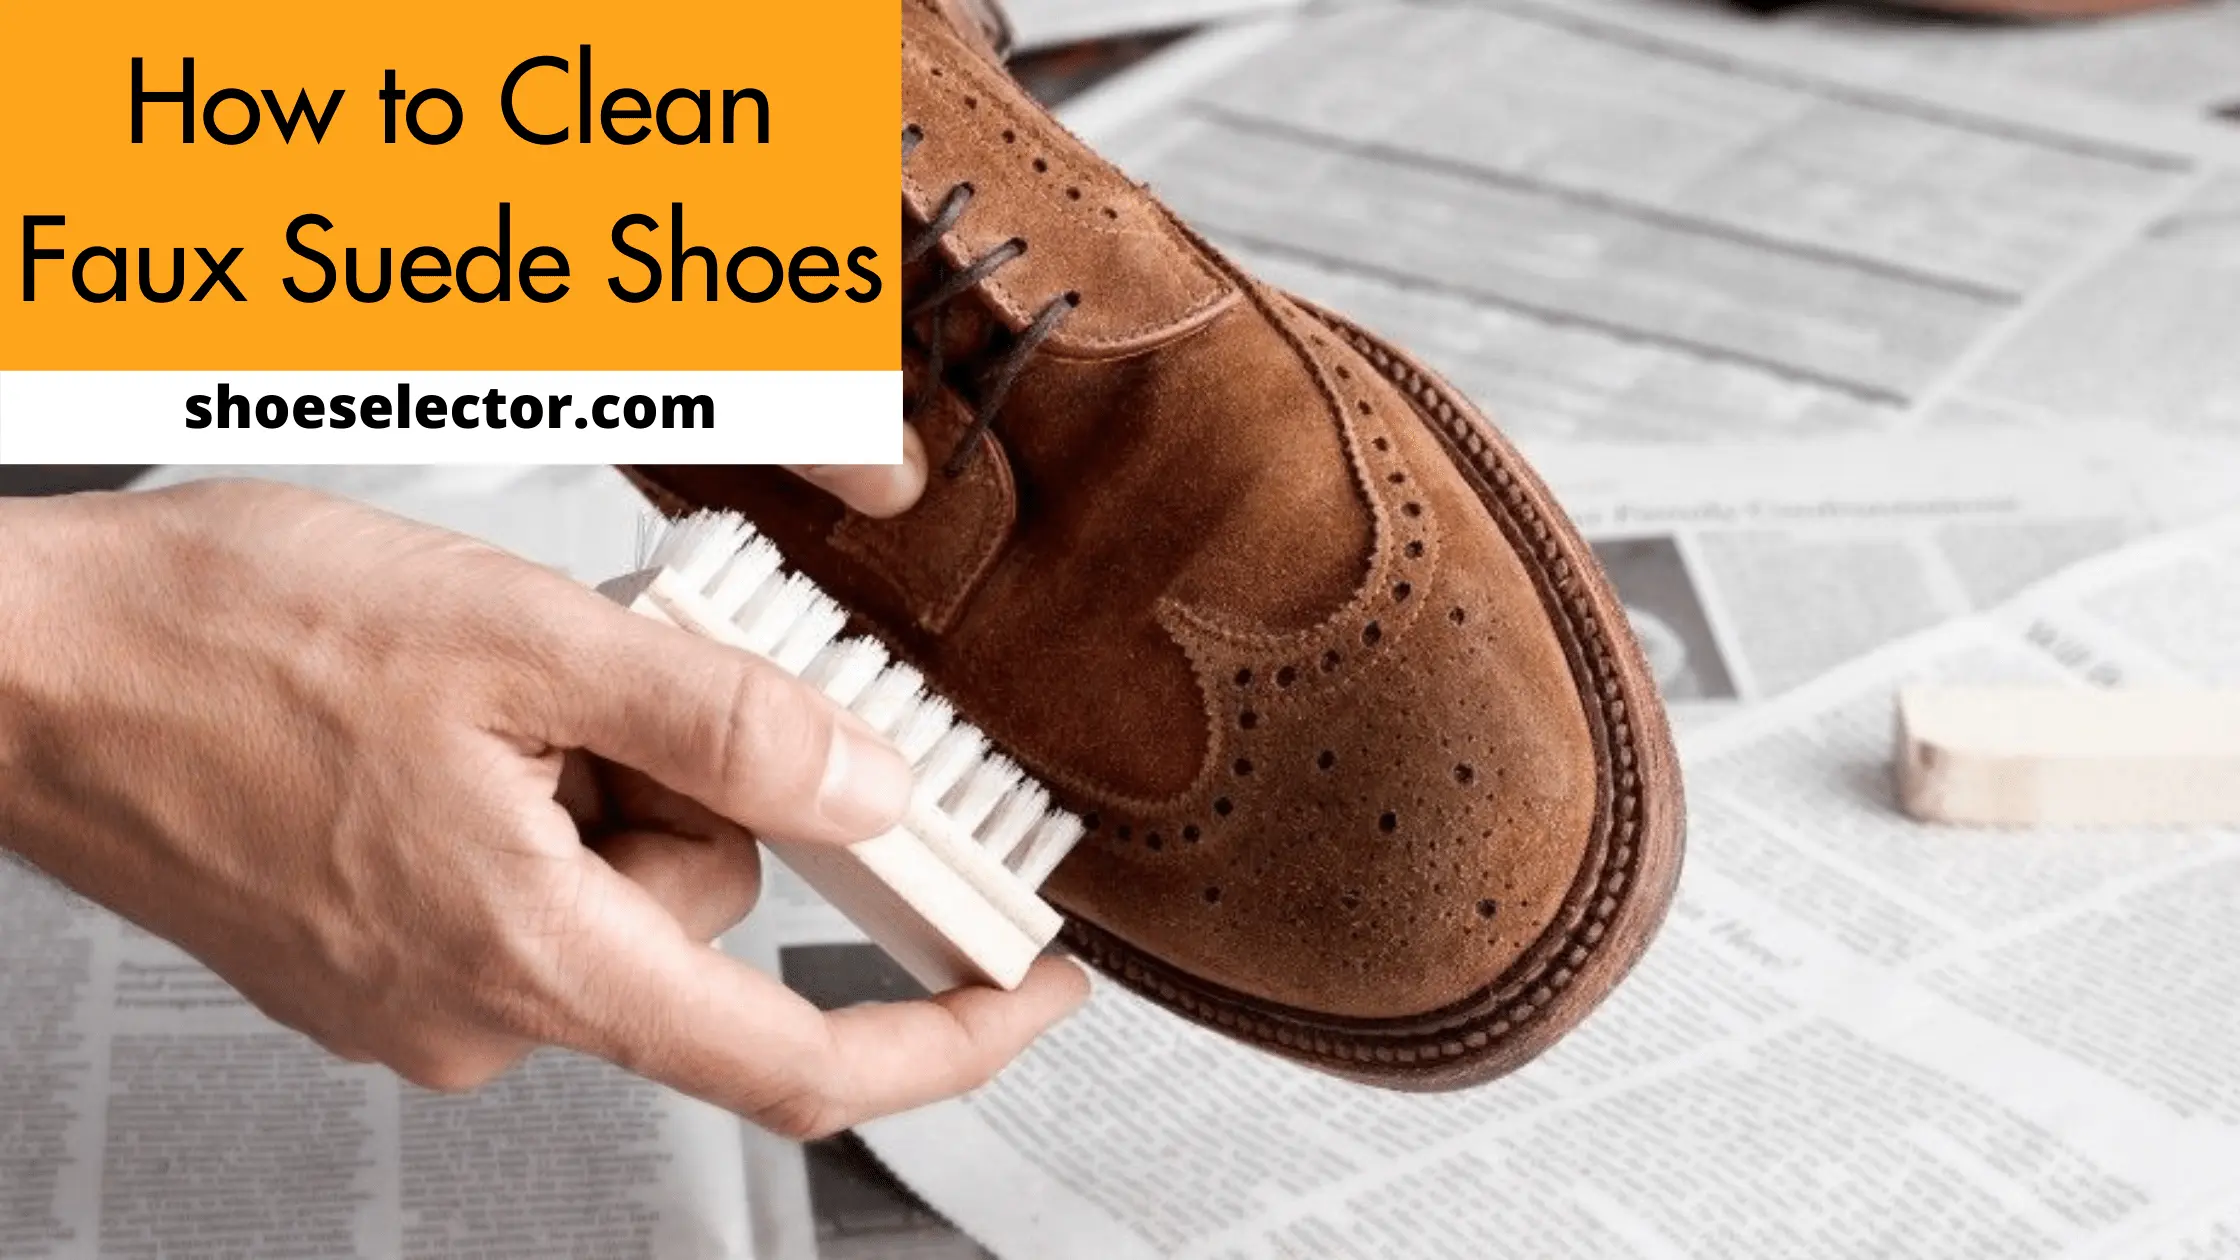 How to Clean Faux Suede Shoes? Detailed Guide